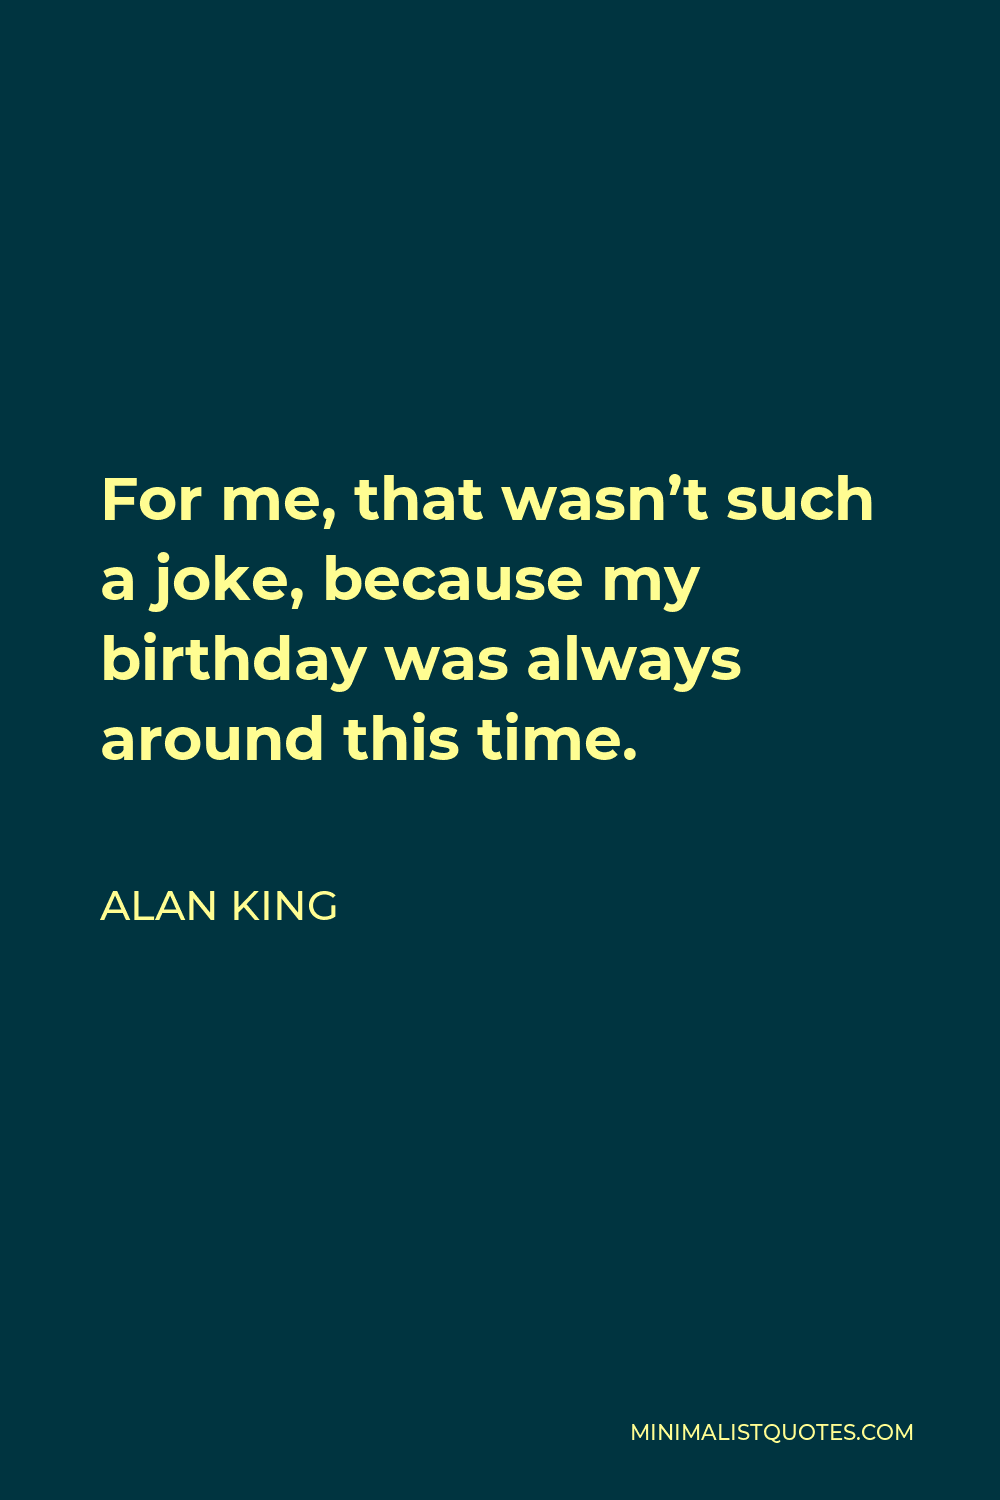 Alan King Quote - For me, that wasn’t such a joke, because my birthday was always around this time.